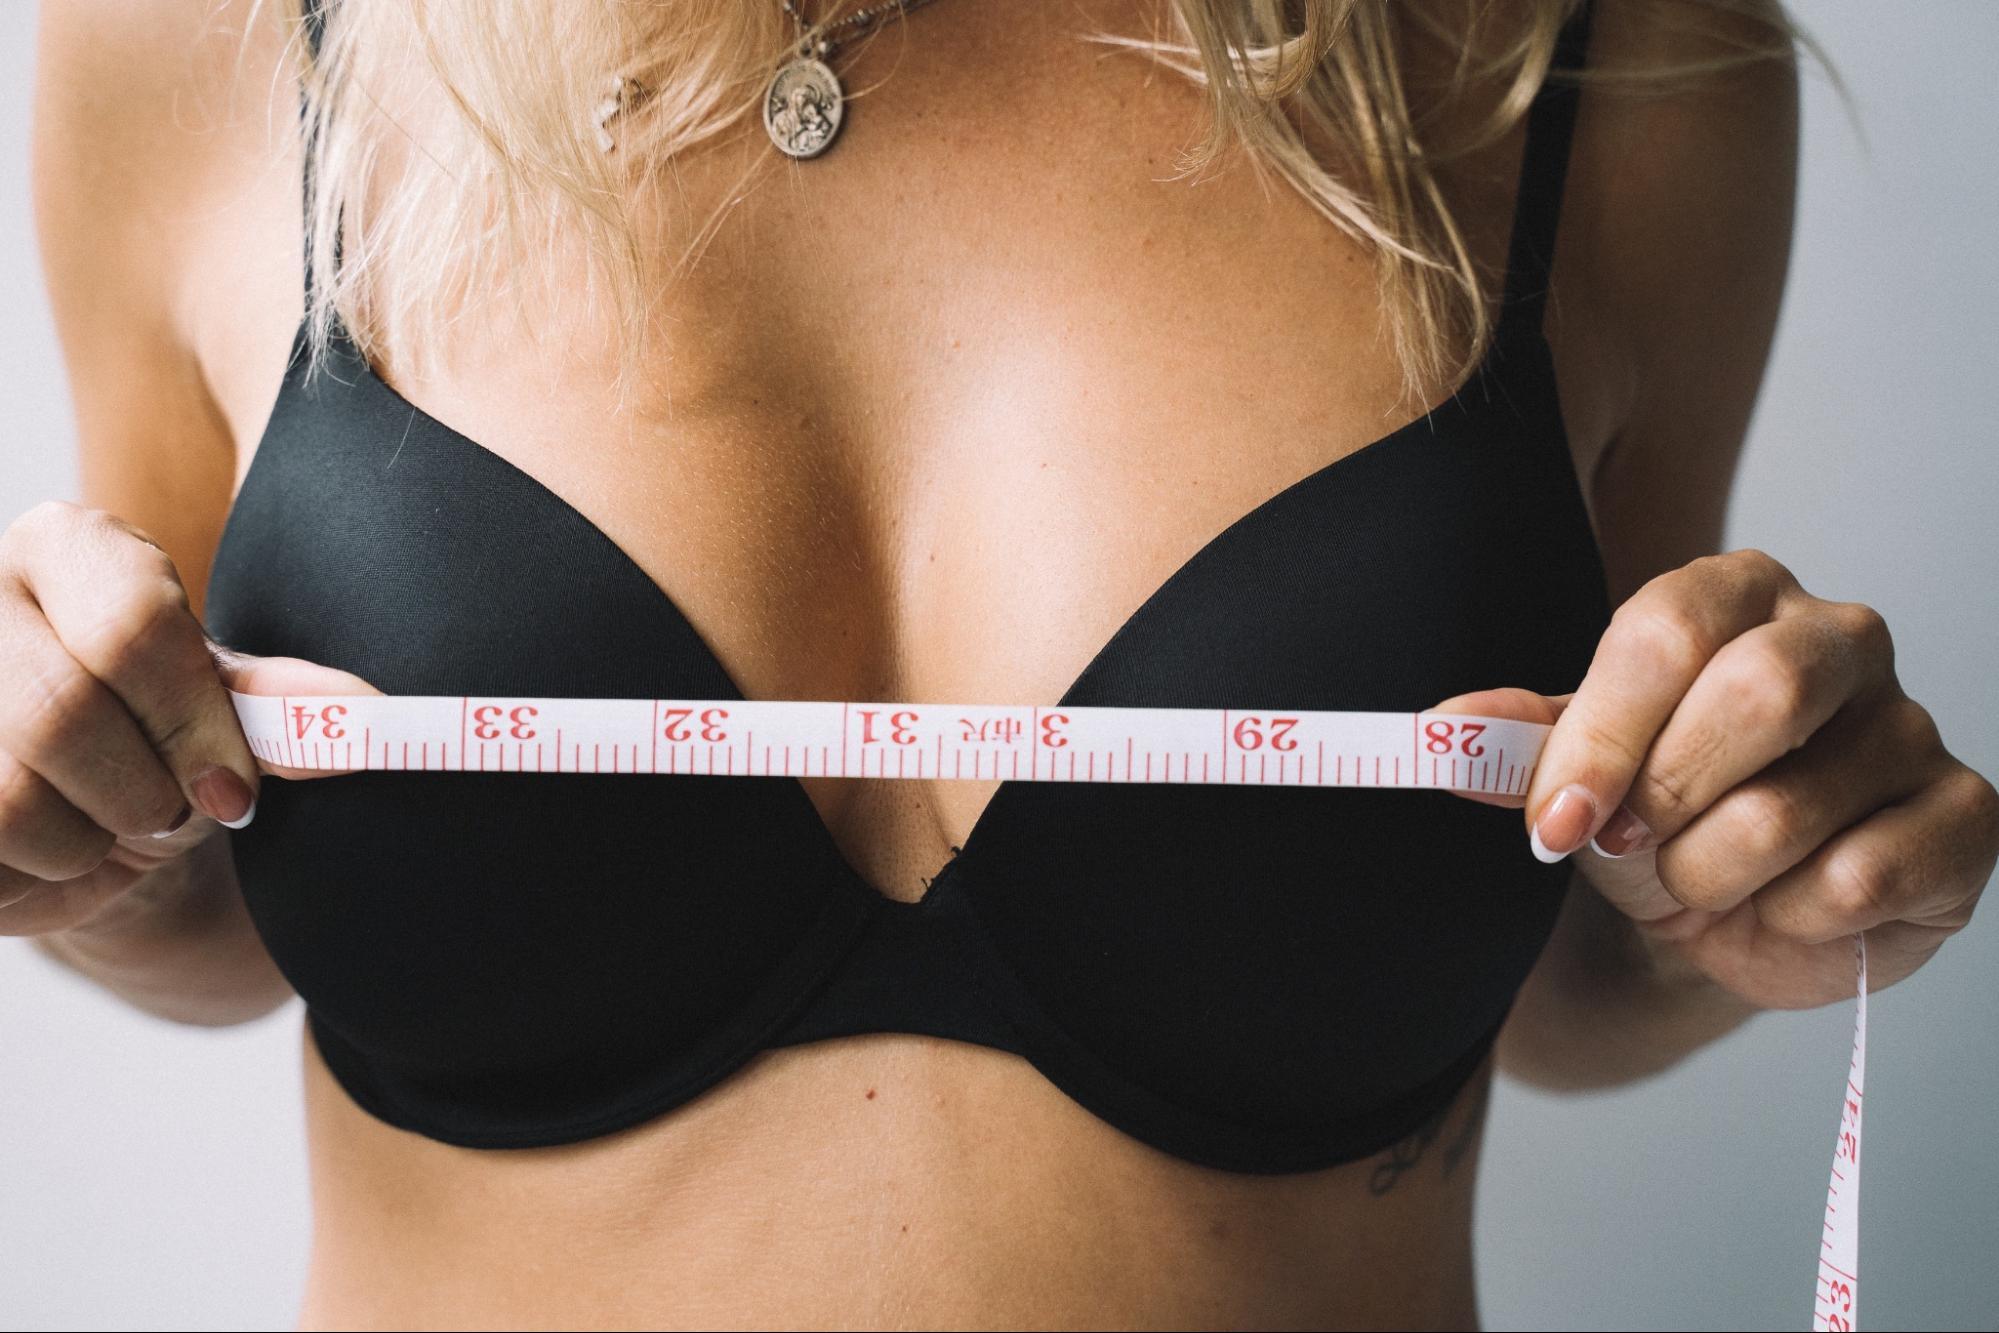 Busted: 80% of women are wearing the wrong size bra